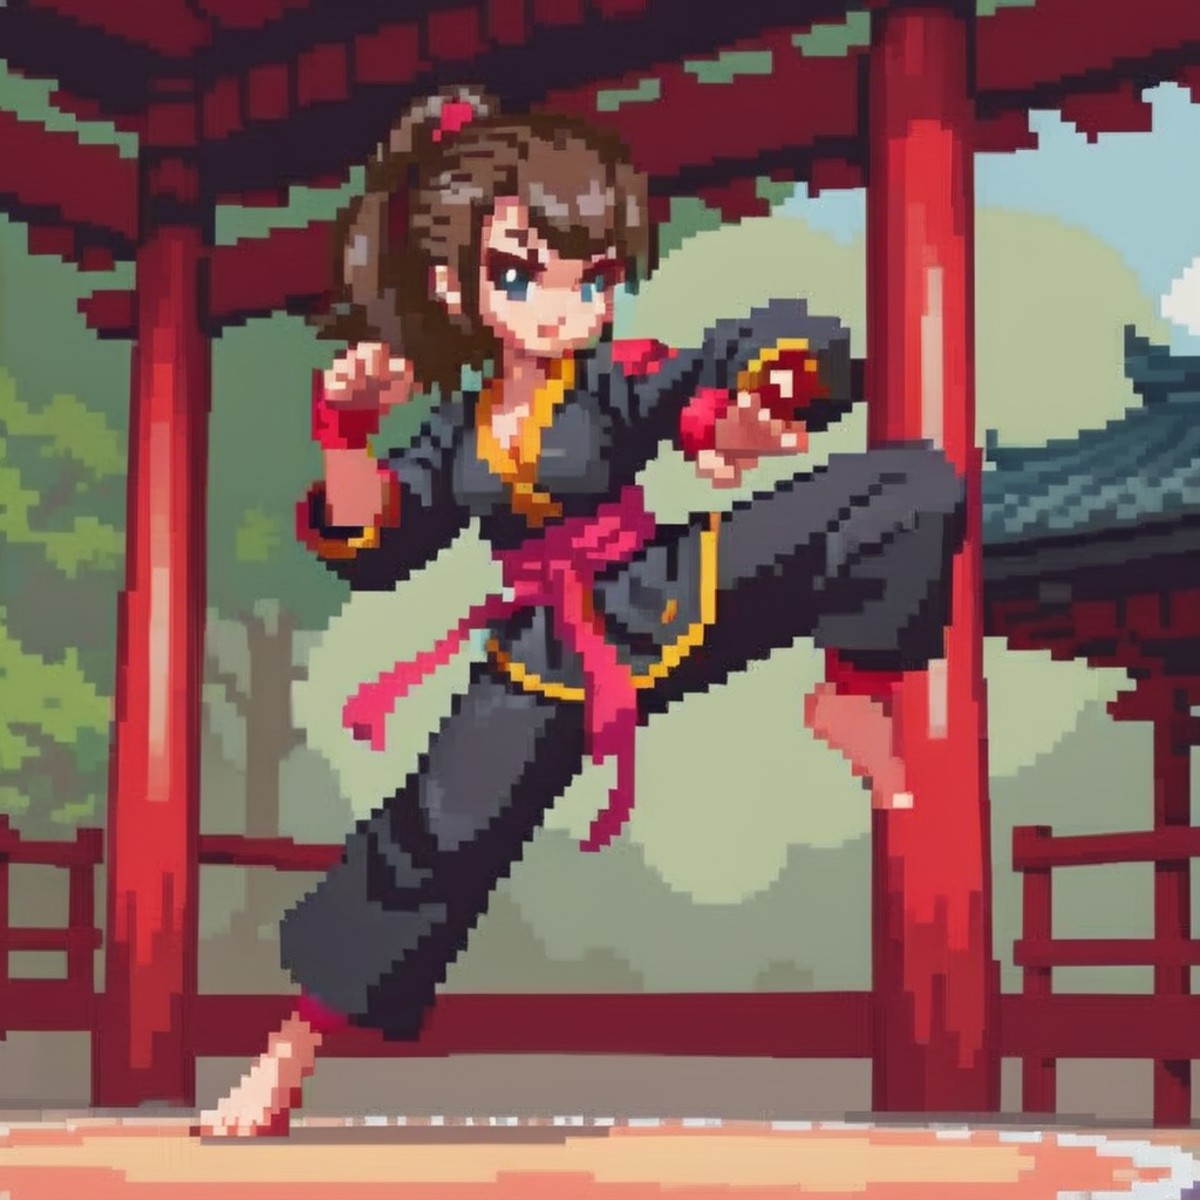 girl,Create an image of a martial artist with a well-proportioned, full figure in a cartoon video game style. The characte...